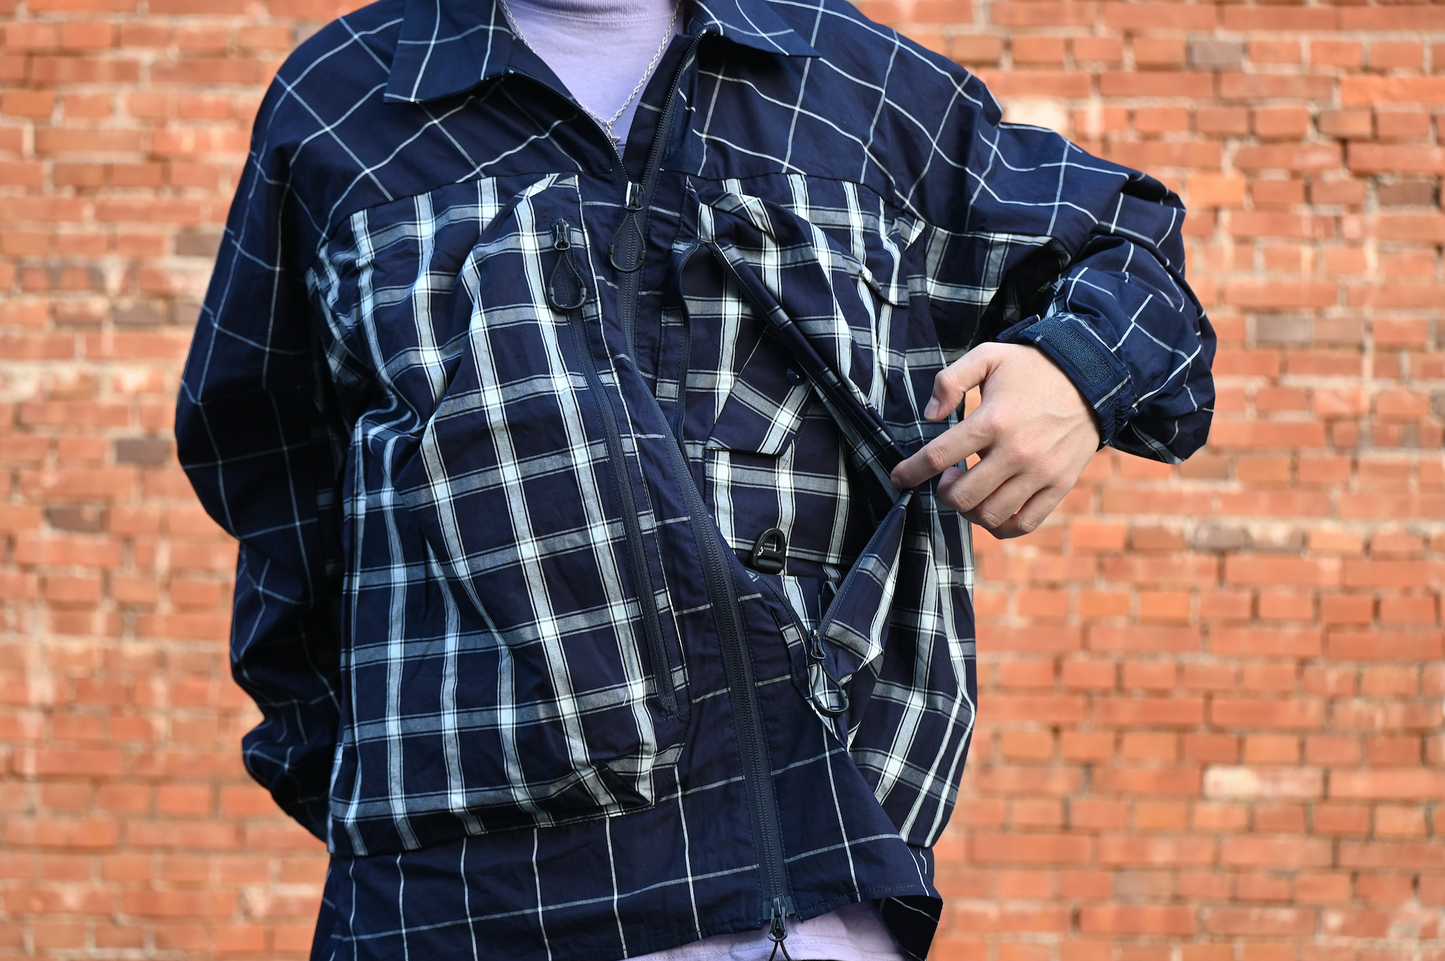 CMF OUTDOOR GARMENT "COVERED SHIRTS"